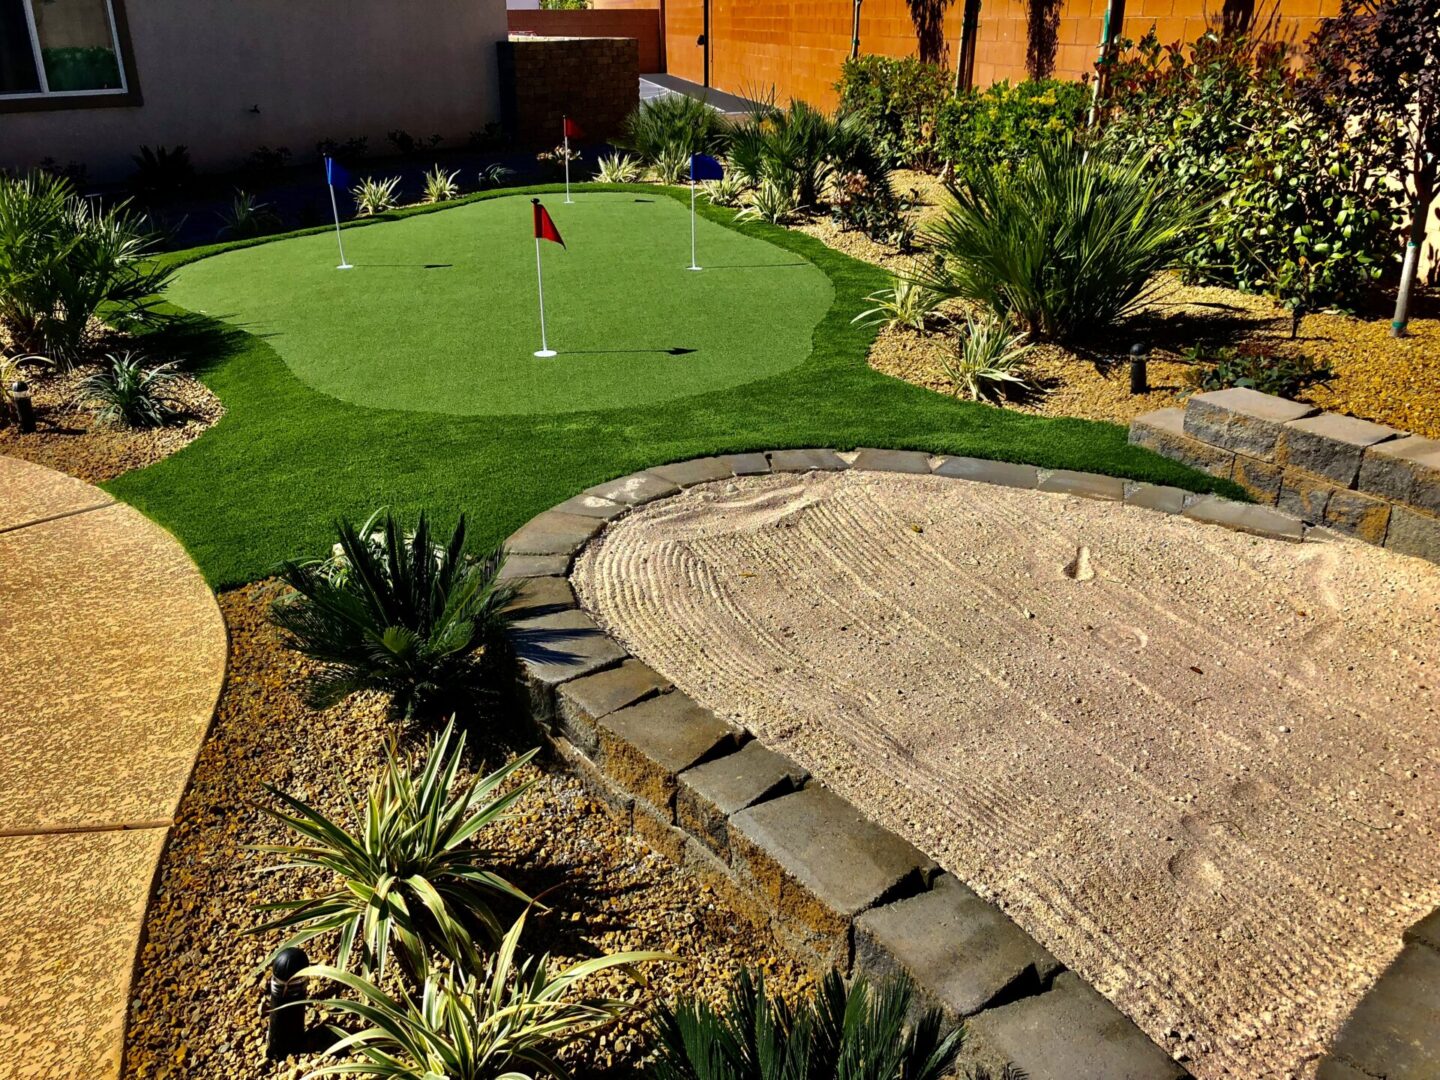 A backyard with a putting green and a golf course.